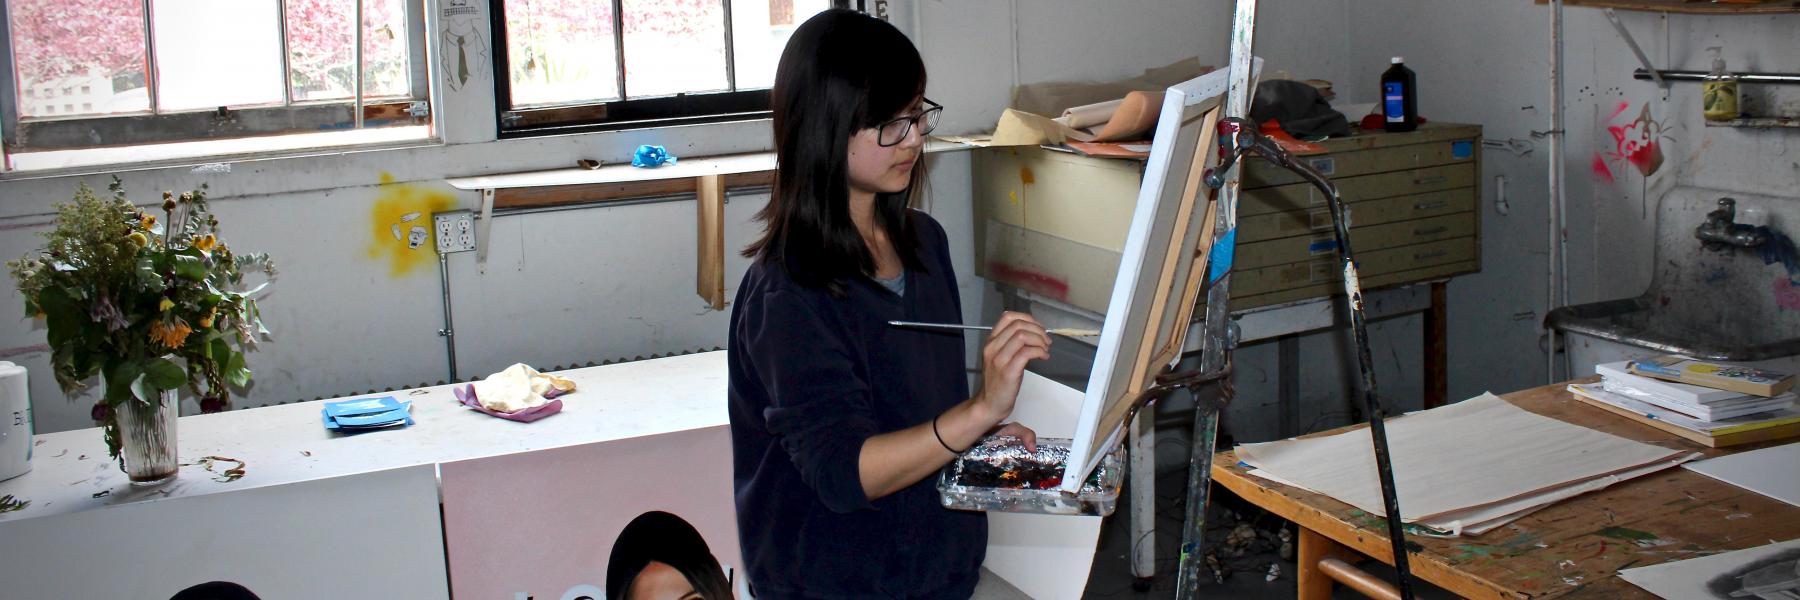 CCS Art student Allison Young in her studio. Credit: Will Proctor